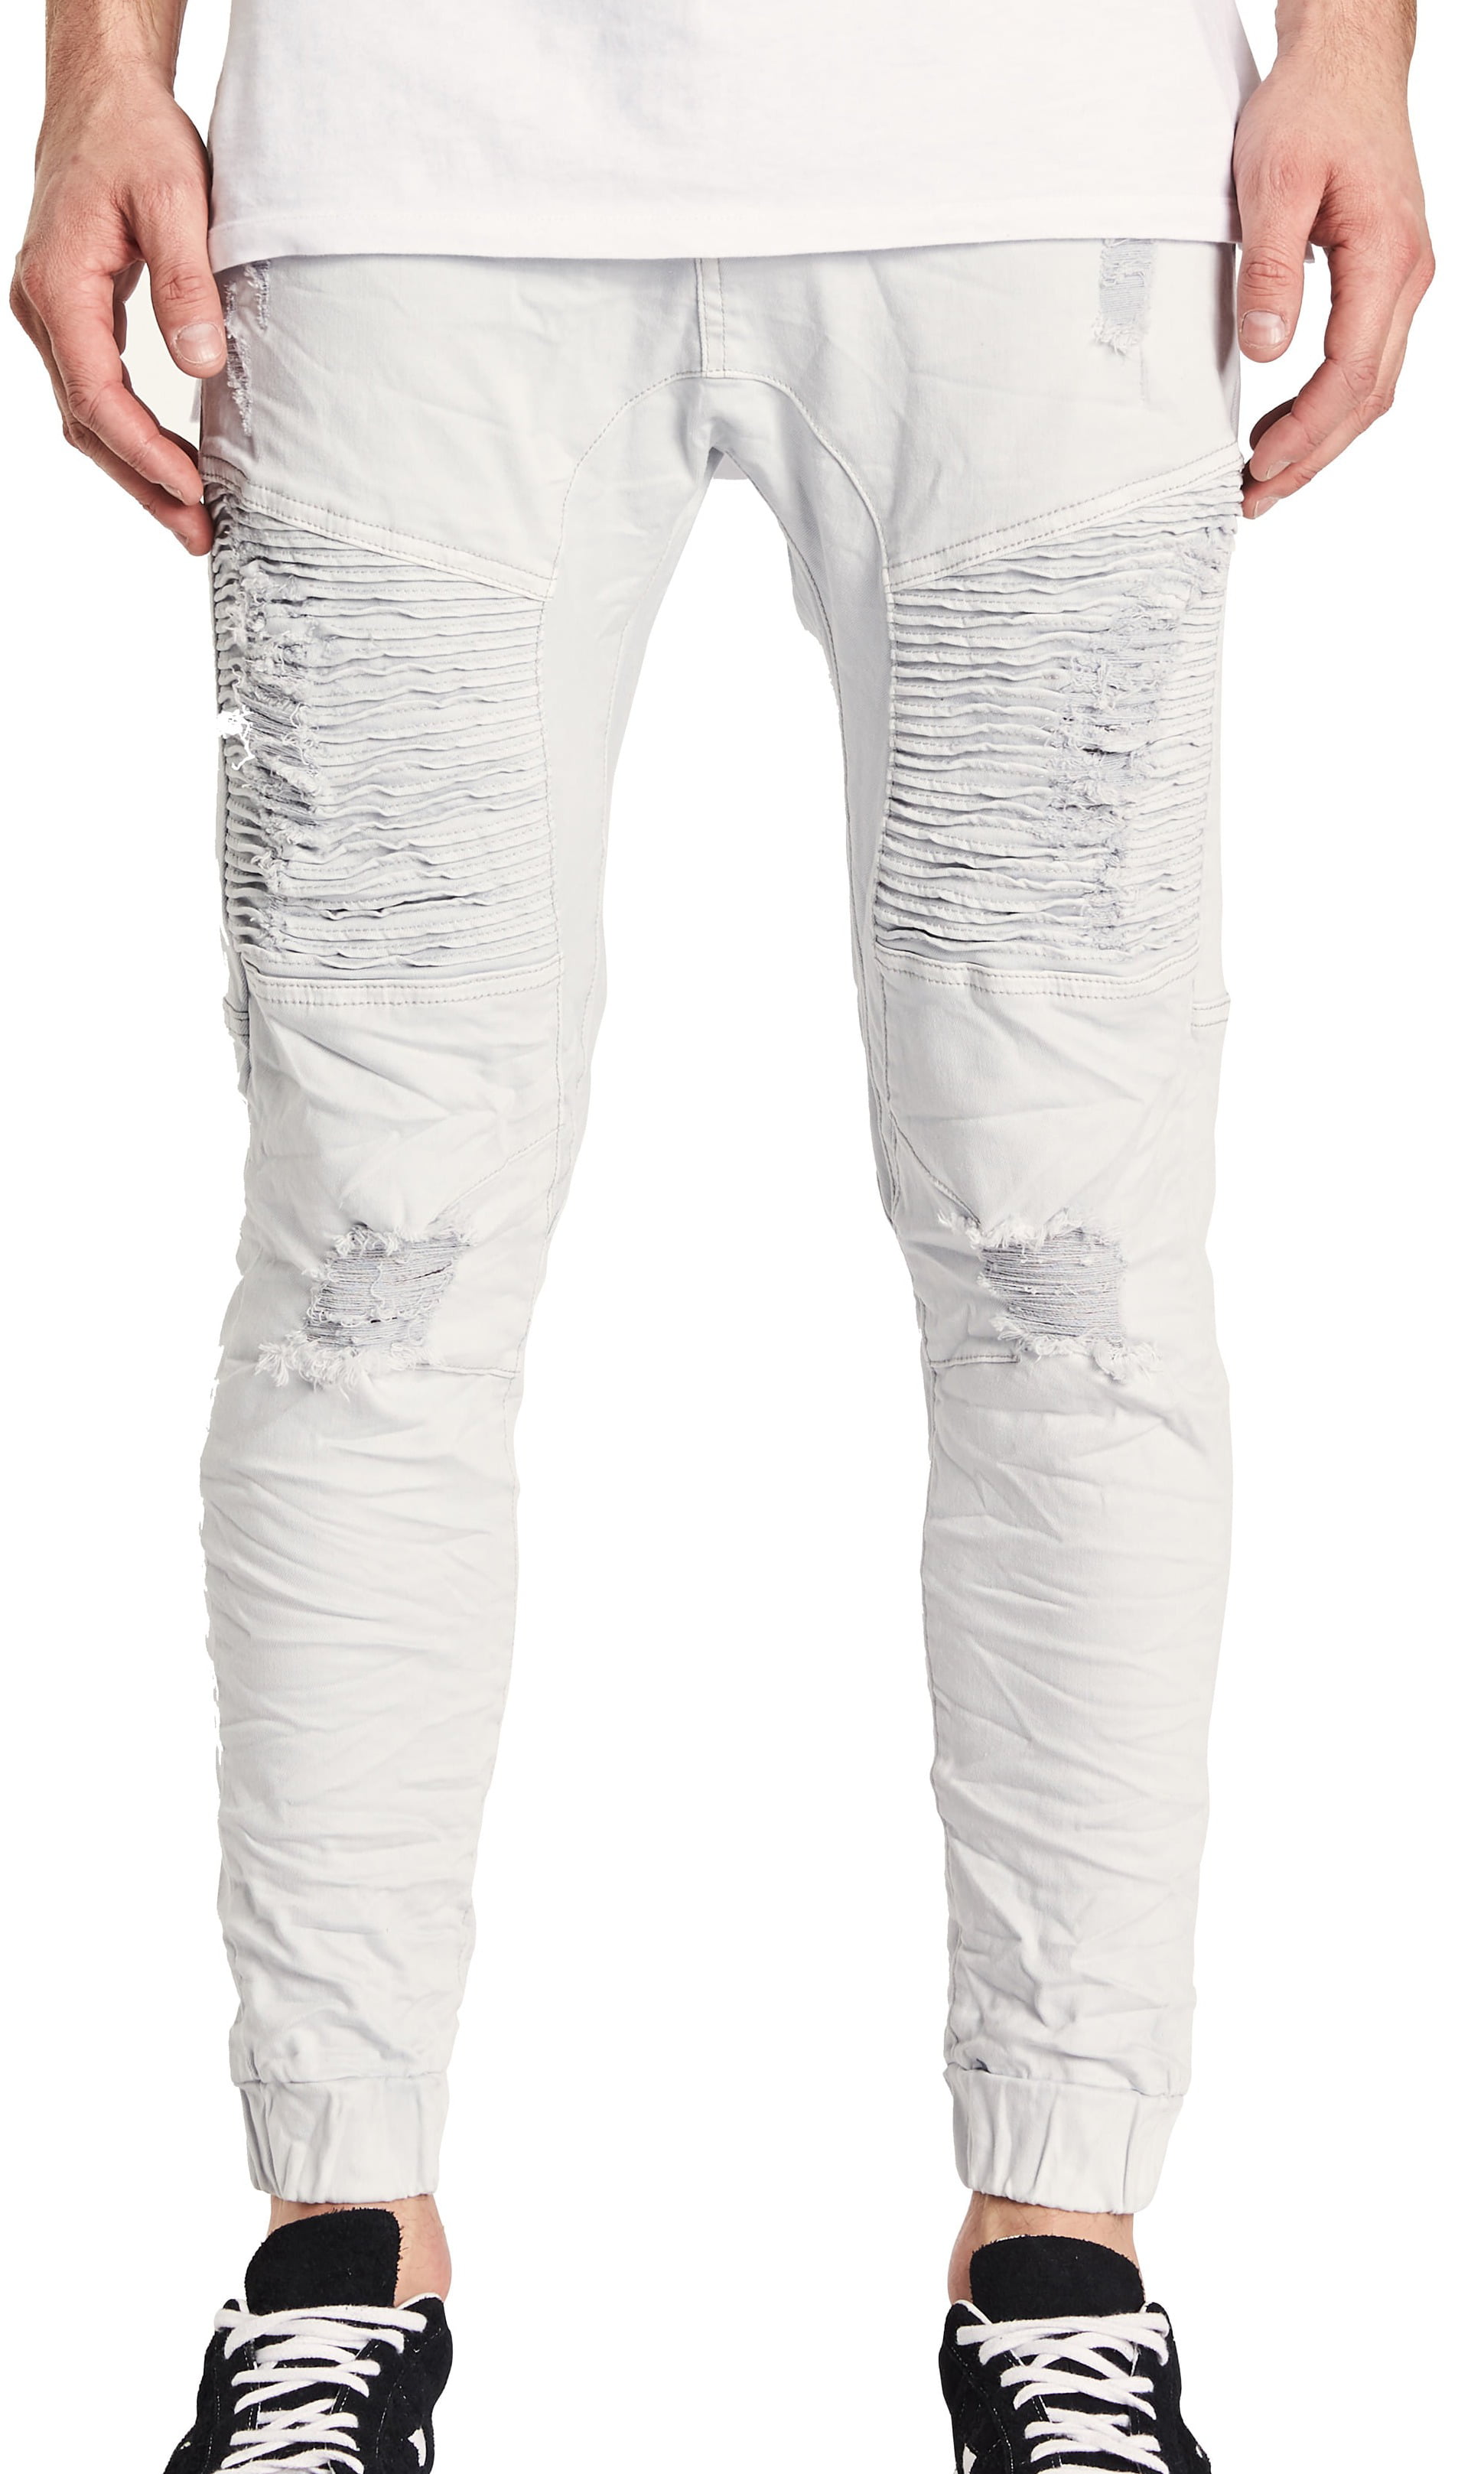 jogger type jeans